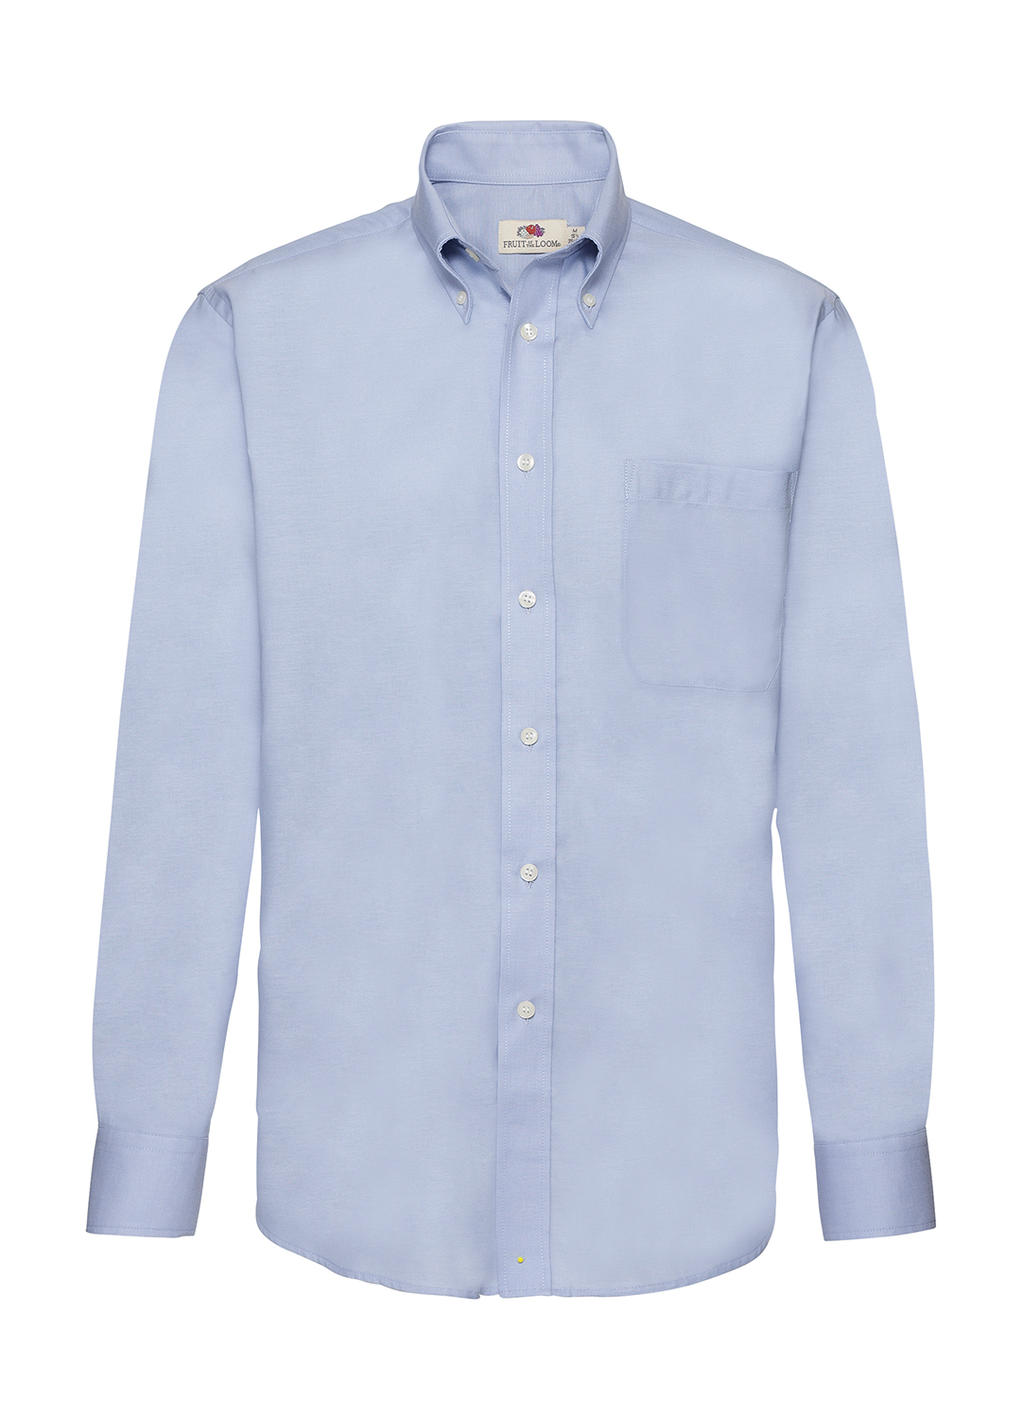  Oxford Shirt LS in Farbe Oxford Blue